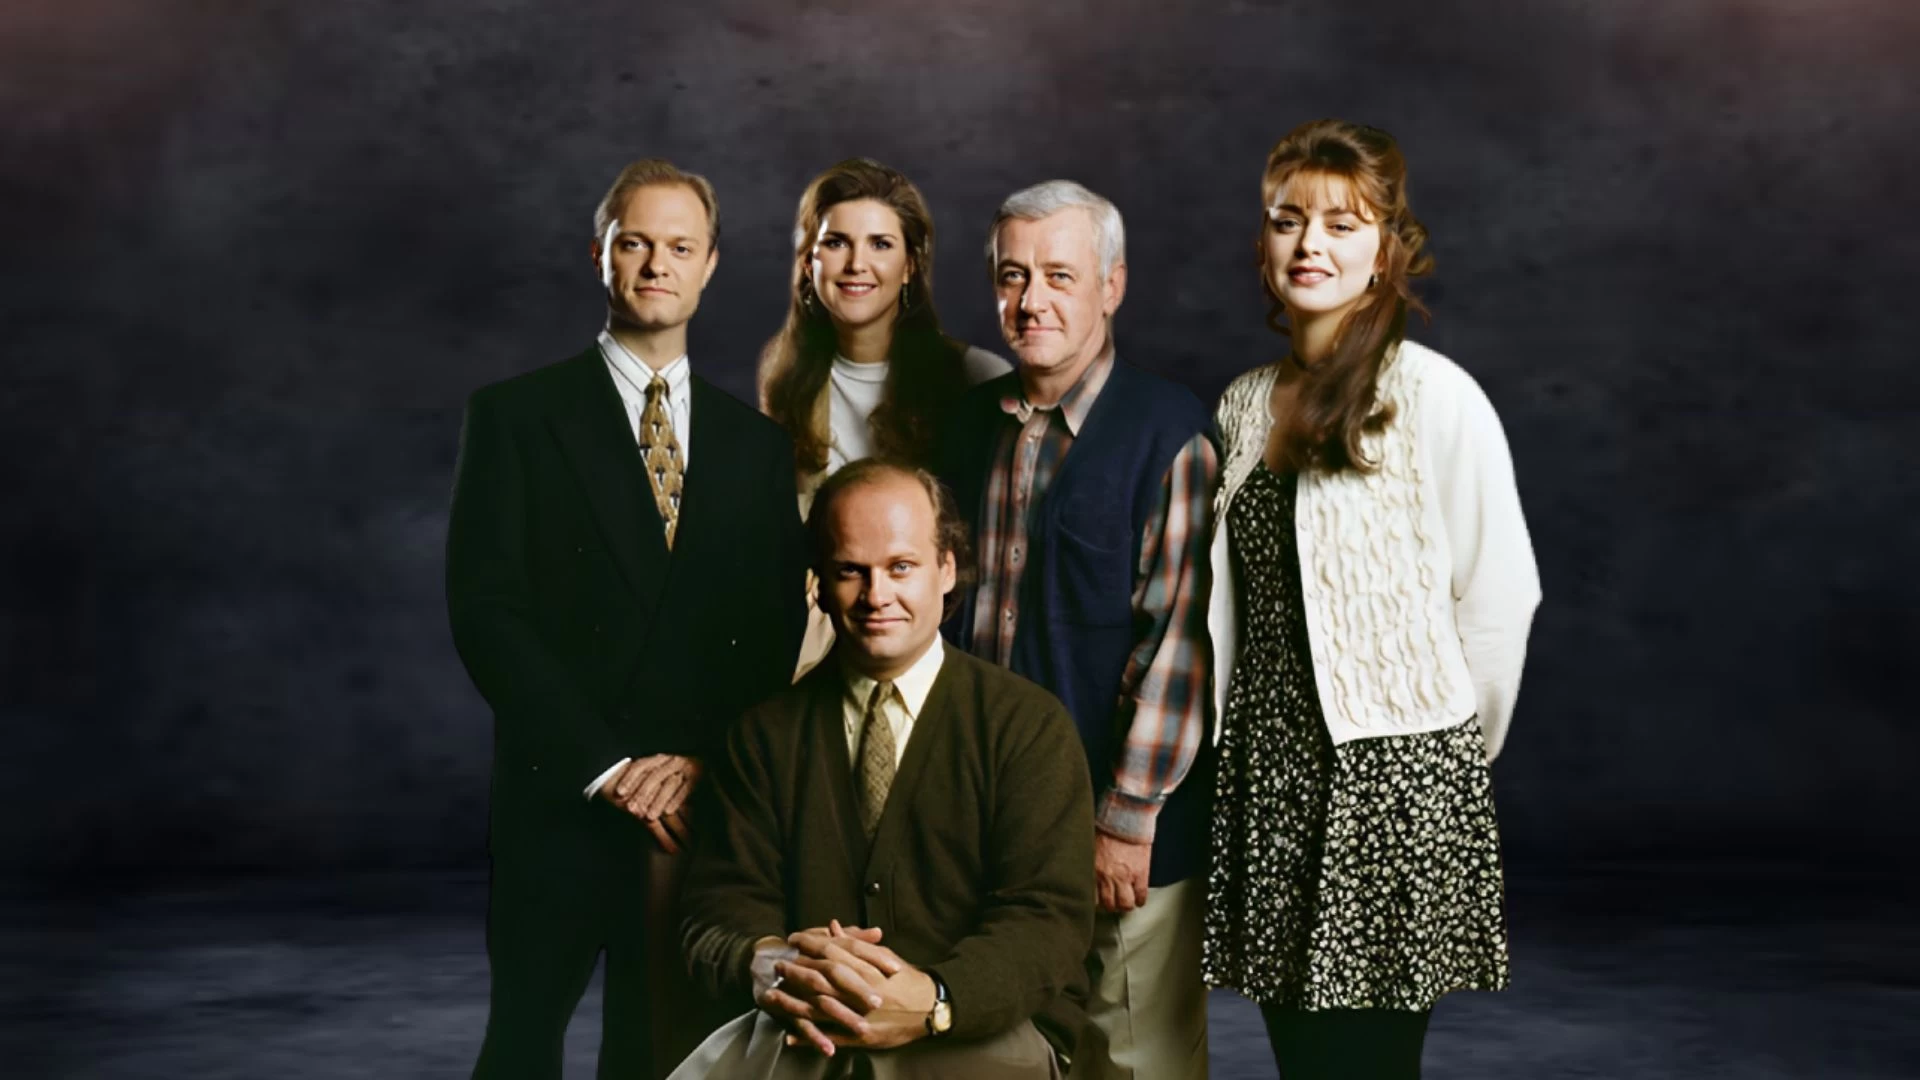 Frasier Season 1 Episode 3 Release Date and Time, Countdown, When Is It Coming Out?